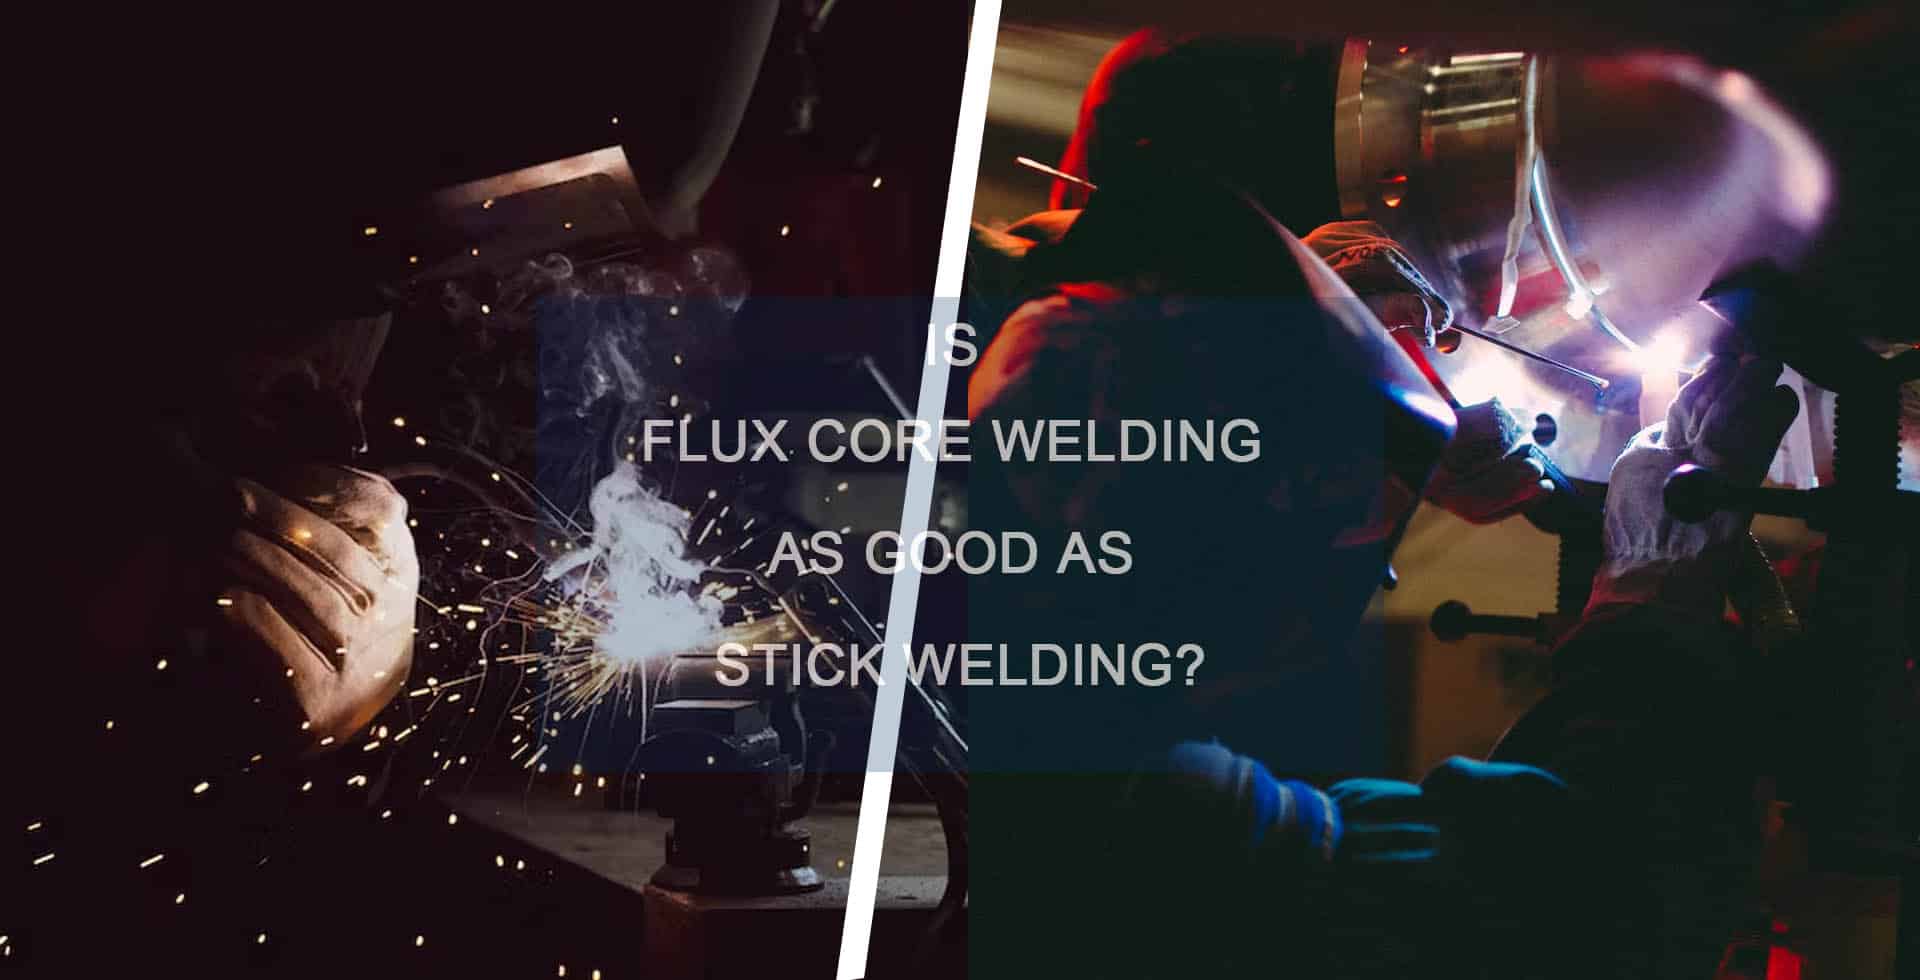 Flux Core Welding and Stick Welding: What’s The Difference?